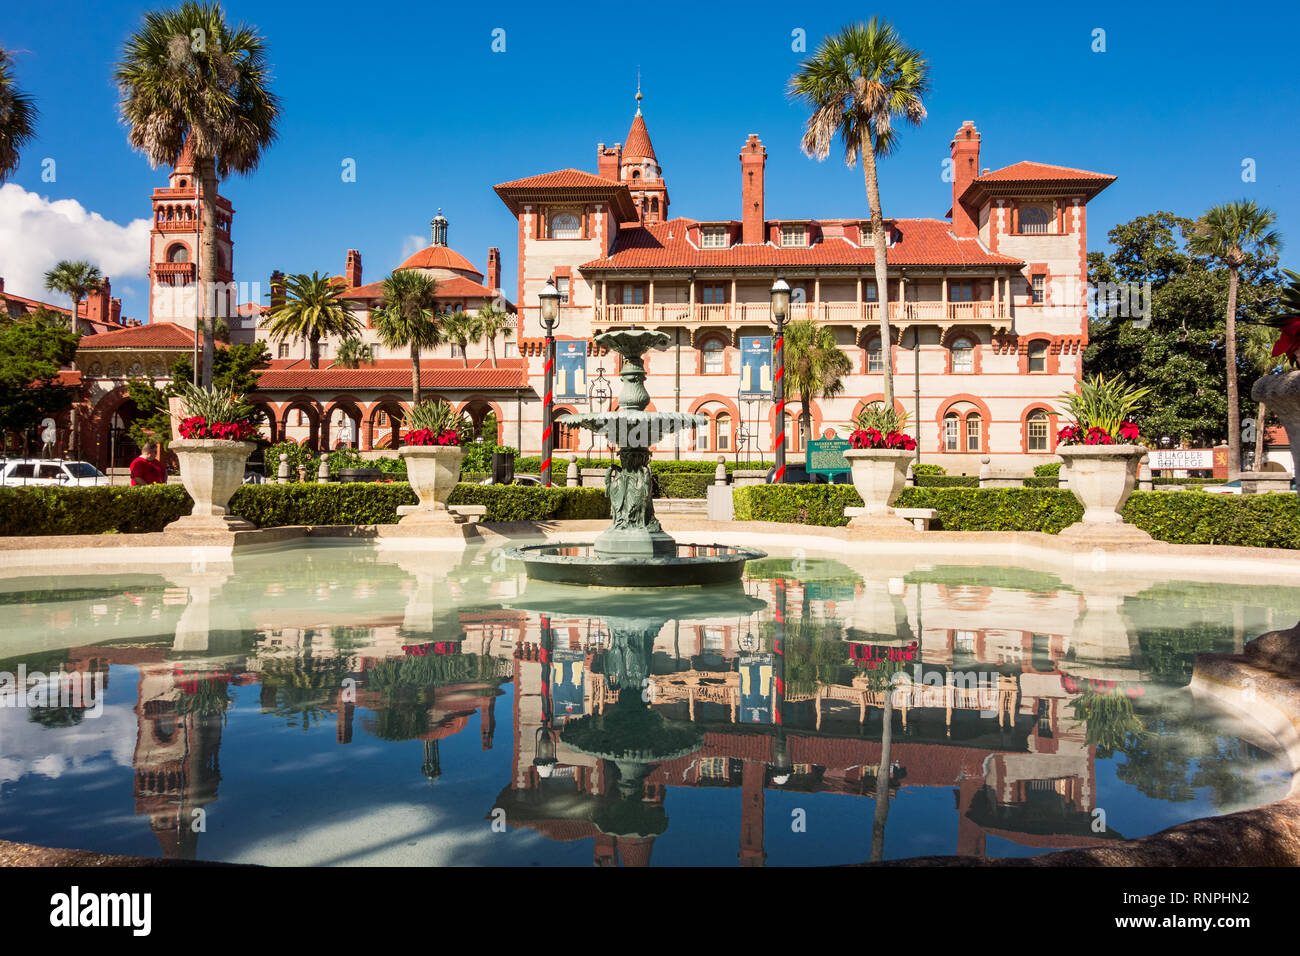 Public park and the ornate Flagler College building in downtown St Augustine, Florida, USA Stock Photo